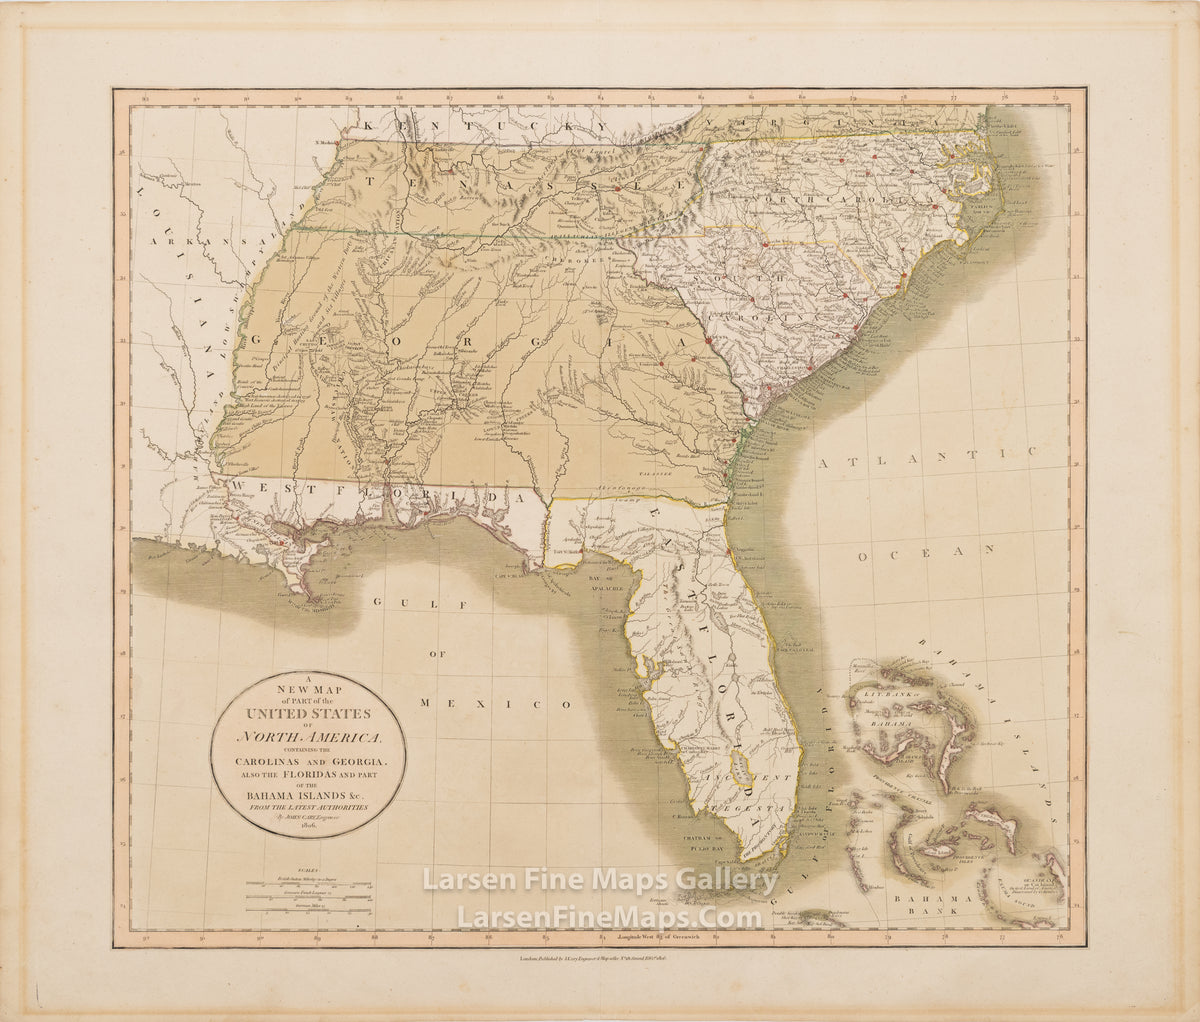 A New Map of Part of the United States of North America, Containing The Carolinas and Georgia, Also The Floridas and Part of the Bahama Islands &c